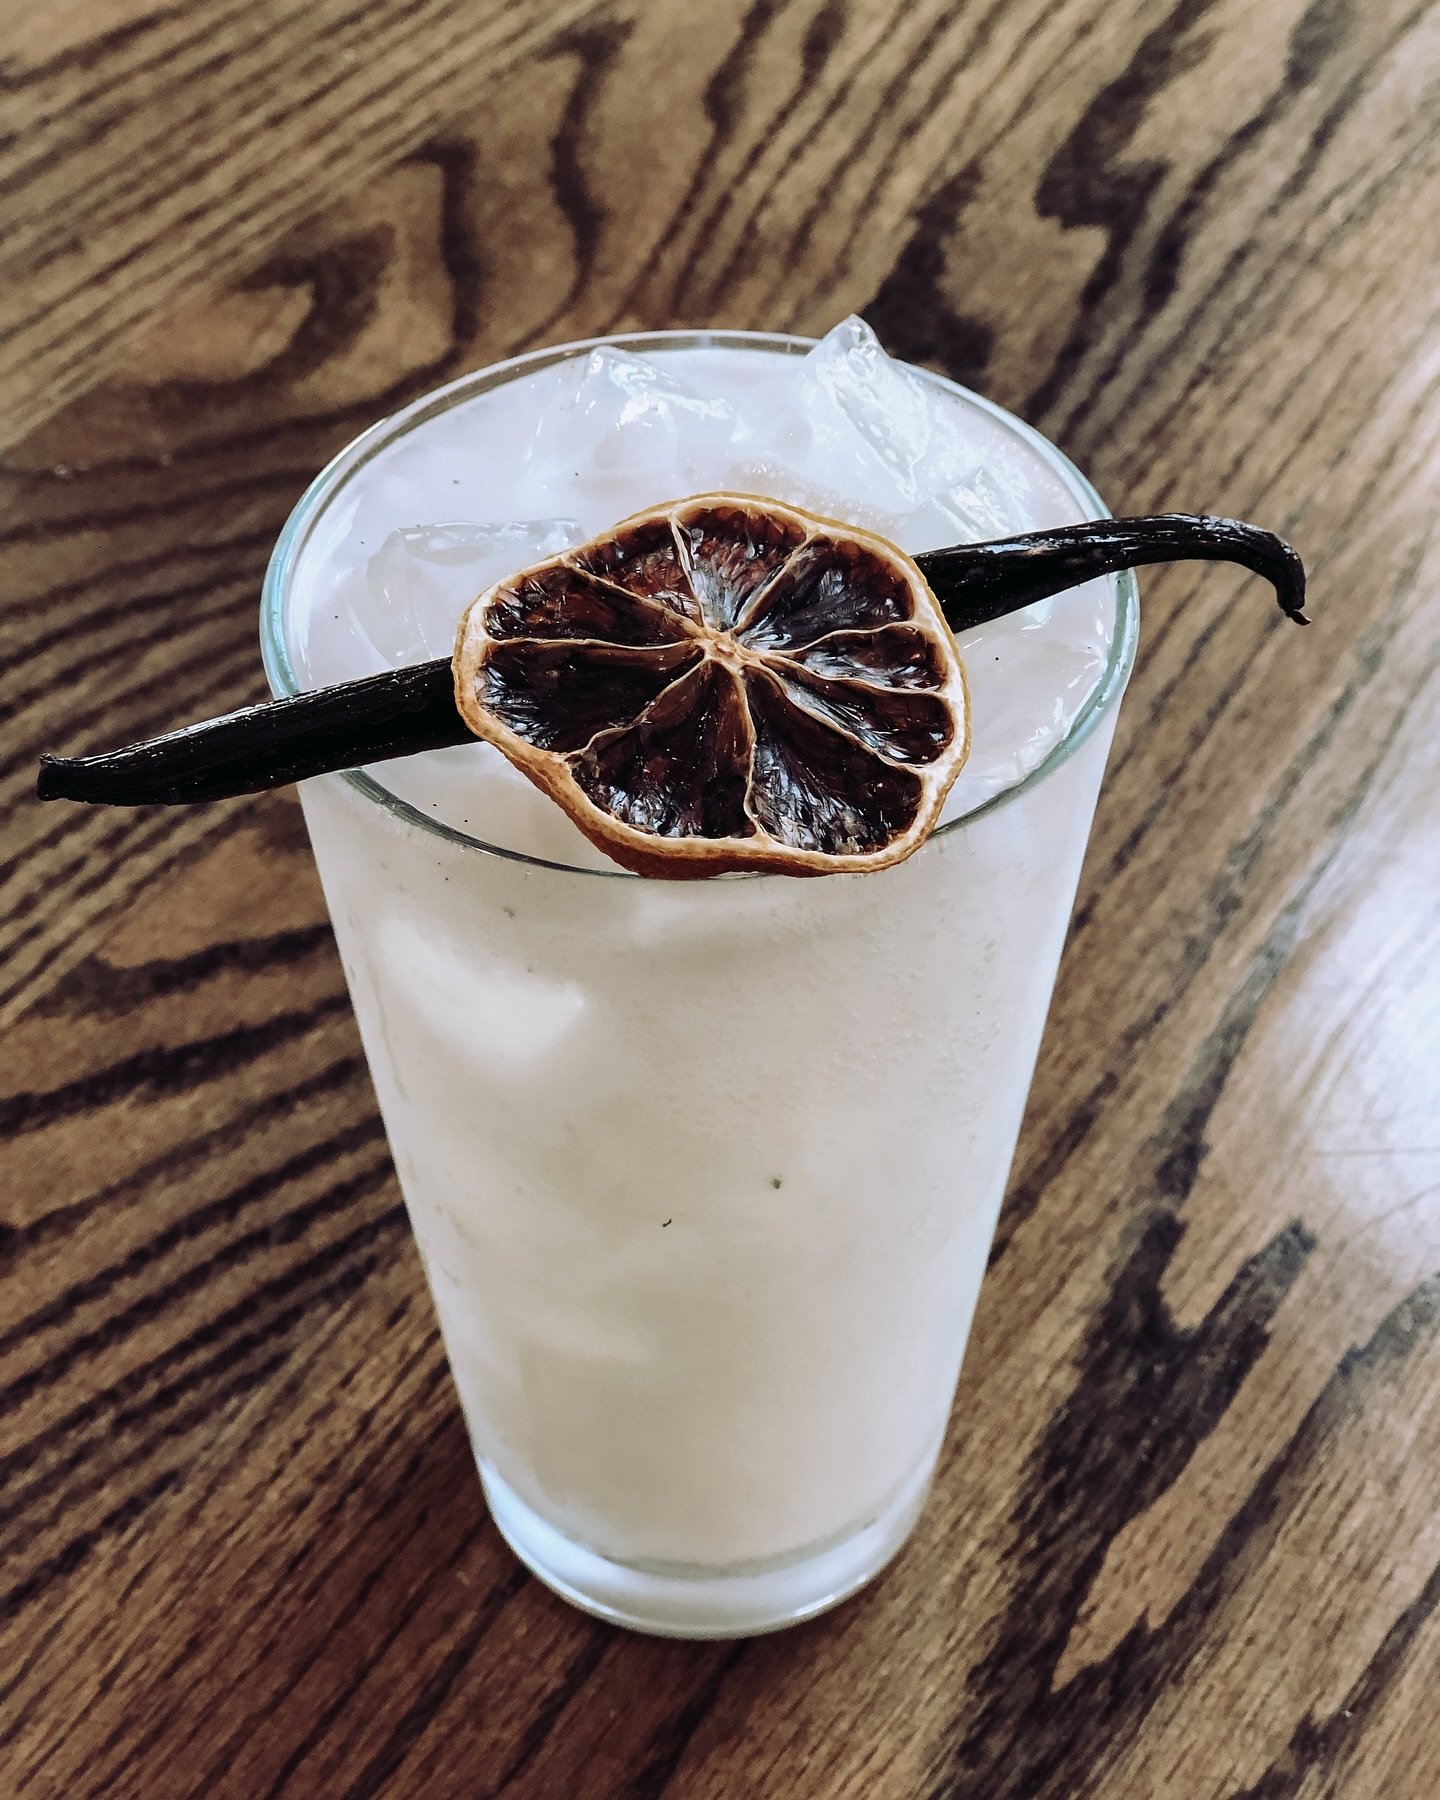 We&rsquo;re feeling pretty experimental here! With some of our extra orange syrup we&rsquo;ve whipped up an Italian Cream Soda. 

With this beautiful weather enjoy something refreshing as you stroll through @themarketatpettaway and all the fun things